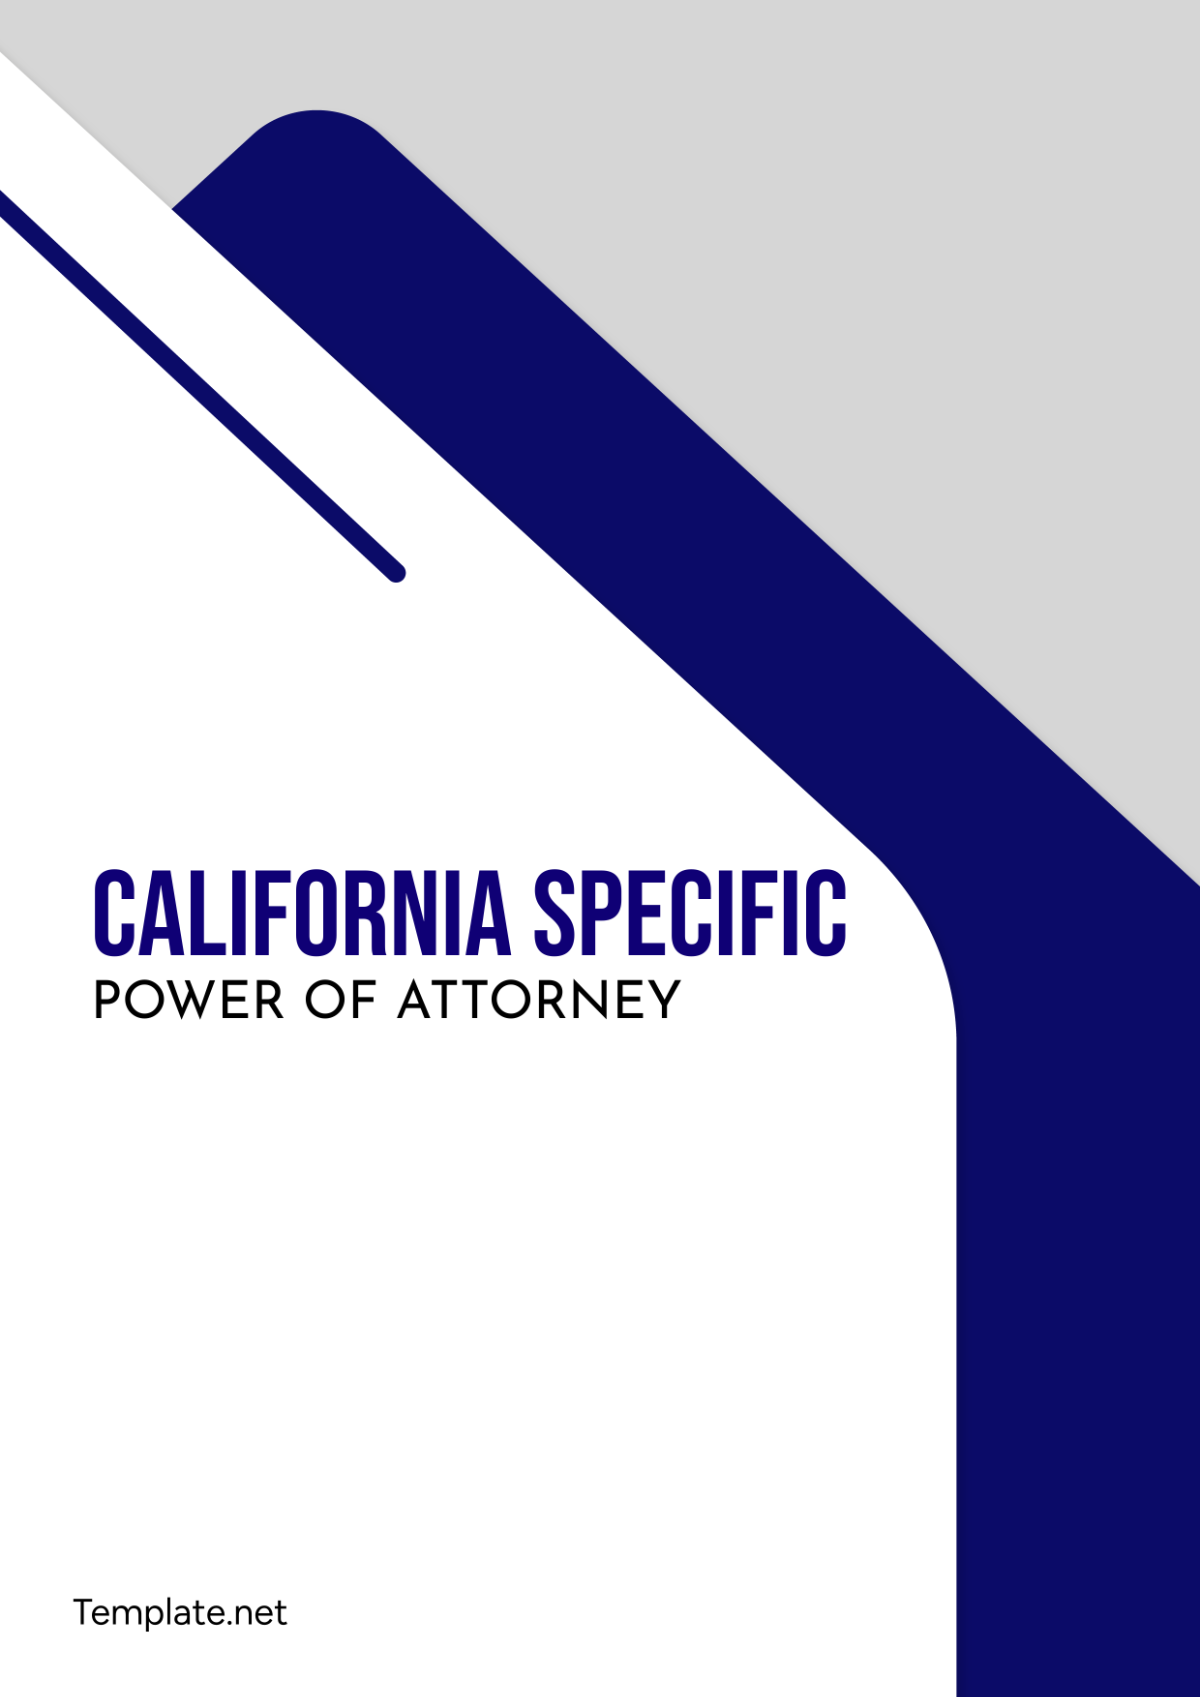 California Specific Power of Attorney Template